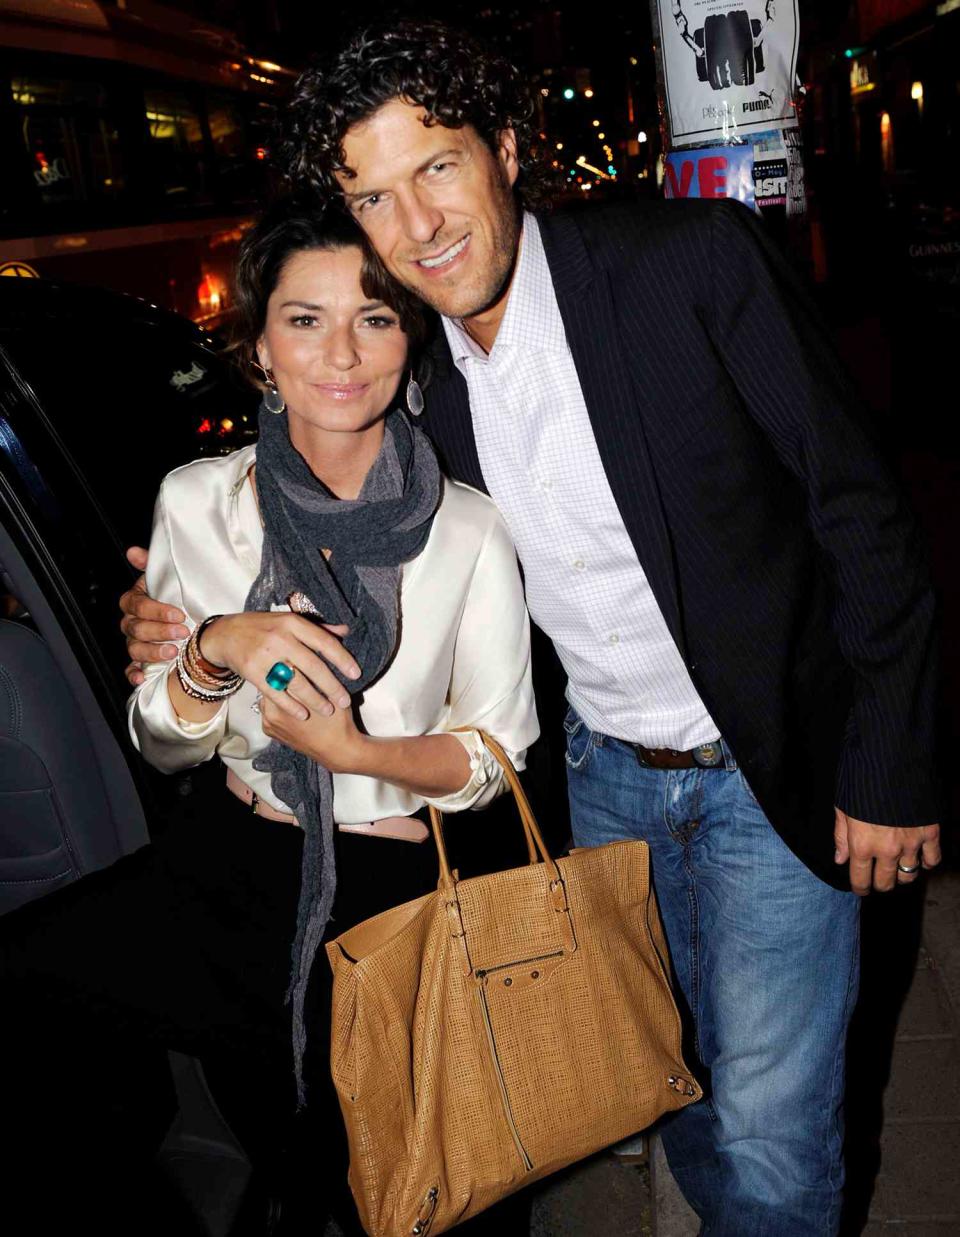 Shania Twain and Frederic Thiebaud seen on the streets of Toronto on May 09, 2011 in Toronto, Canada